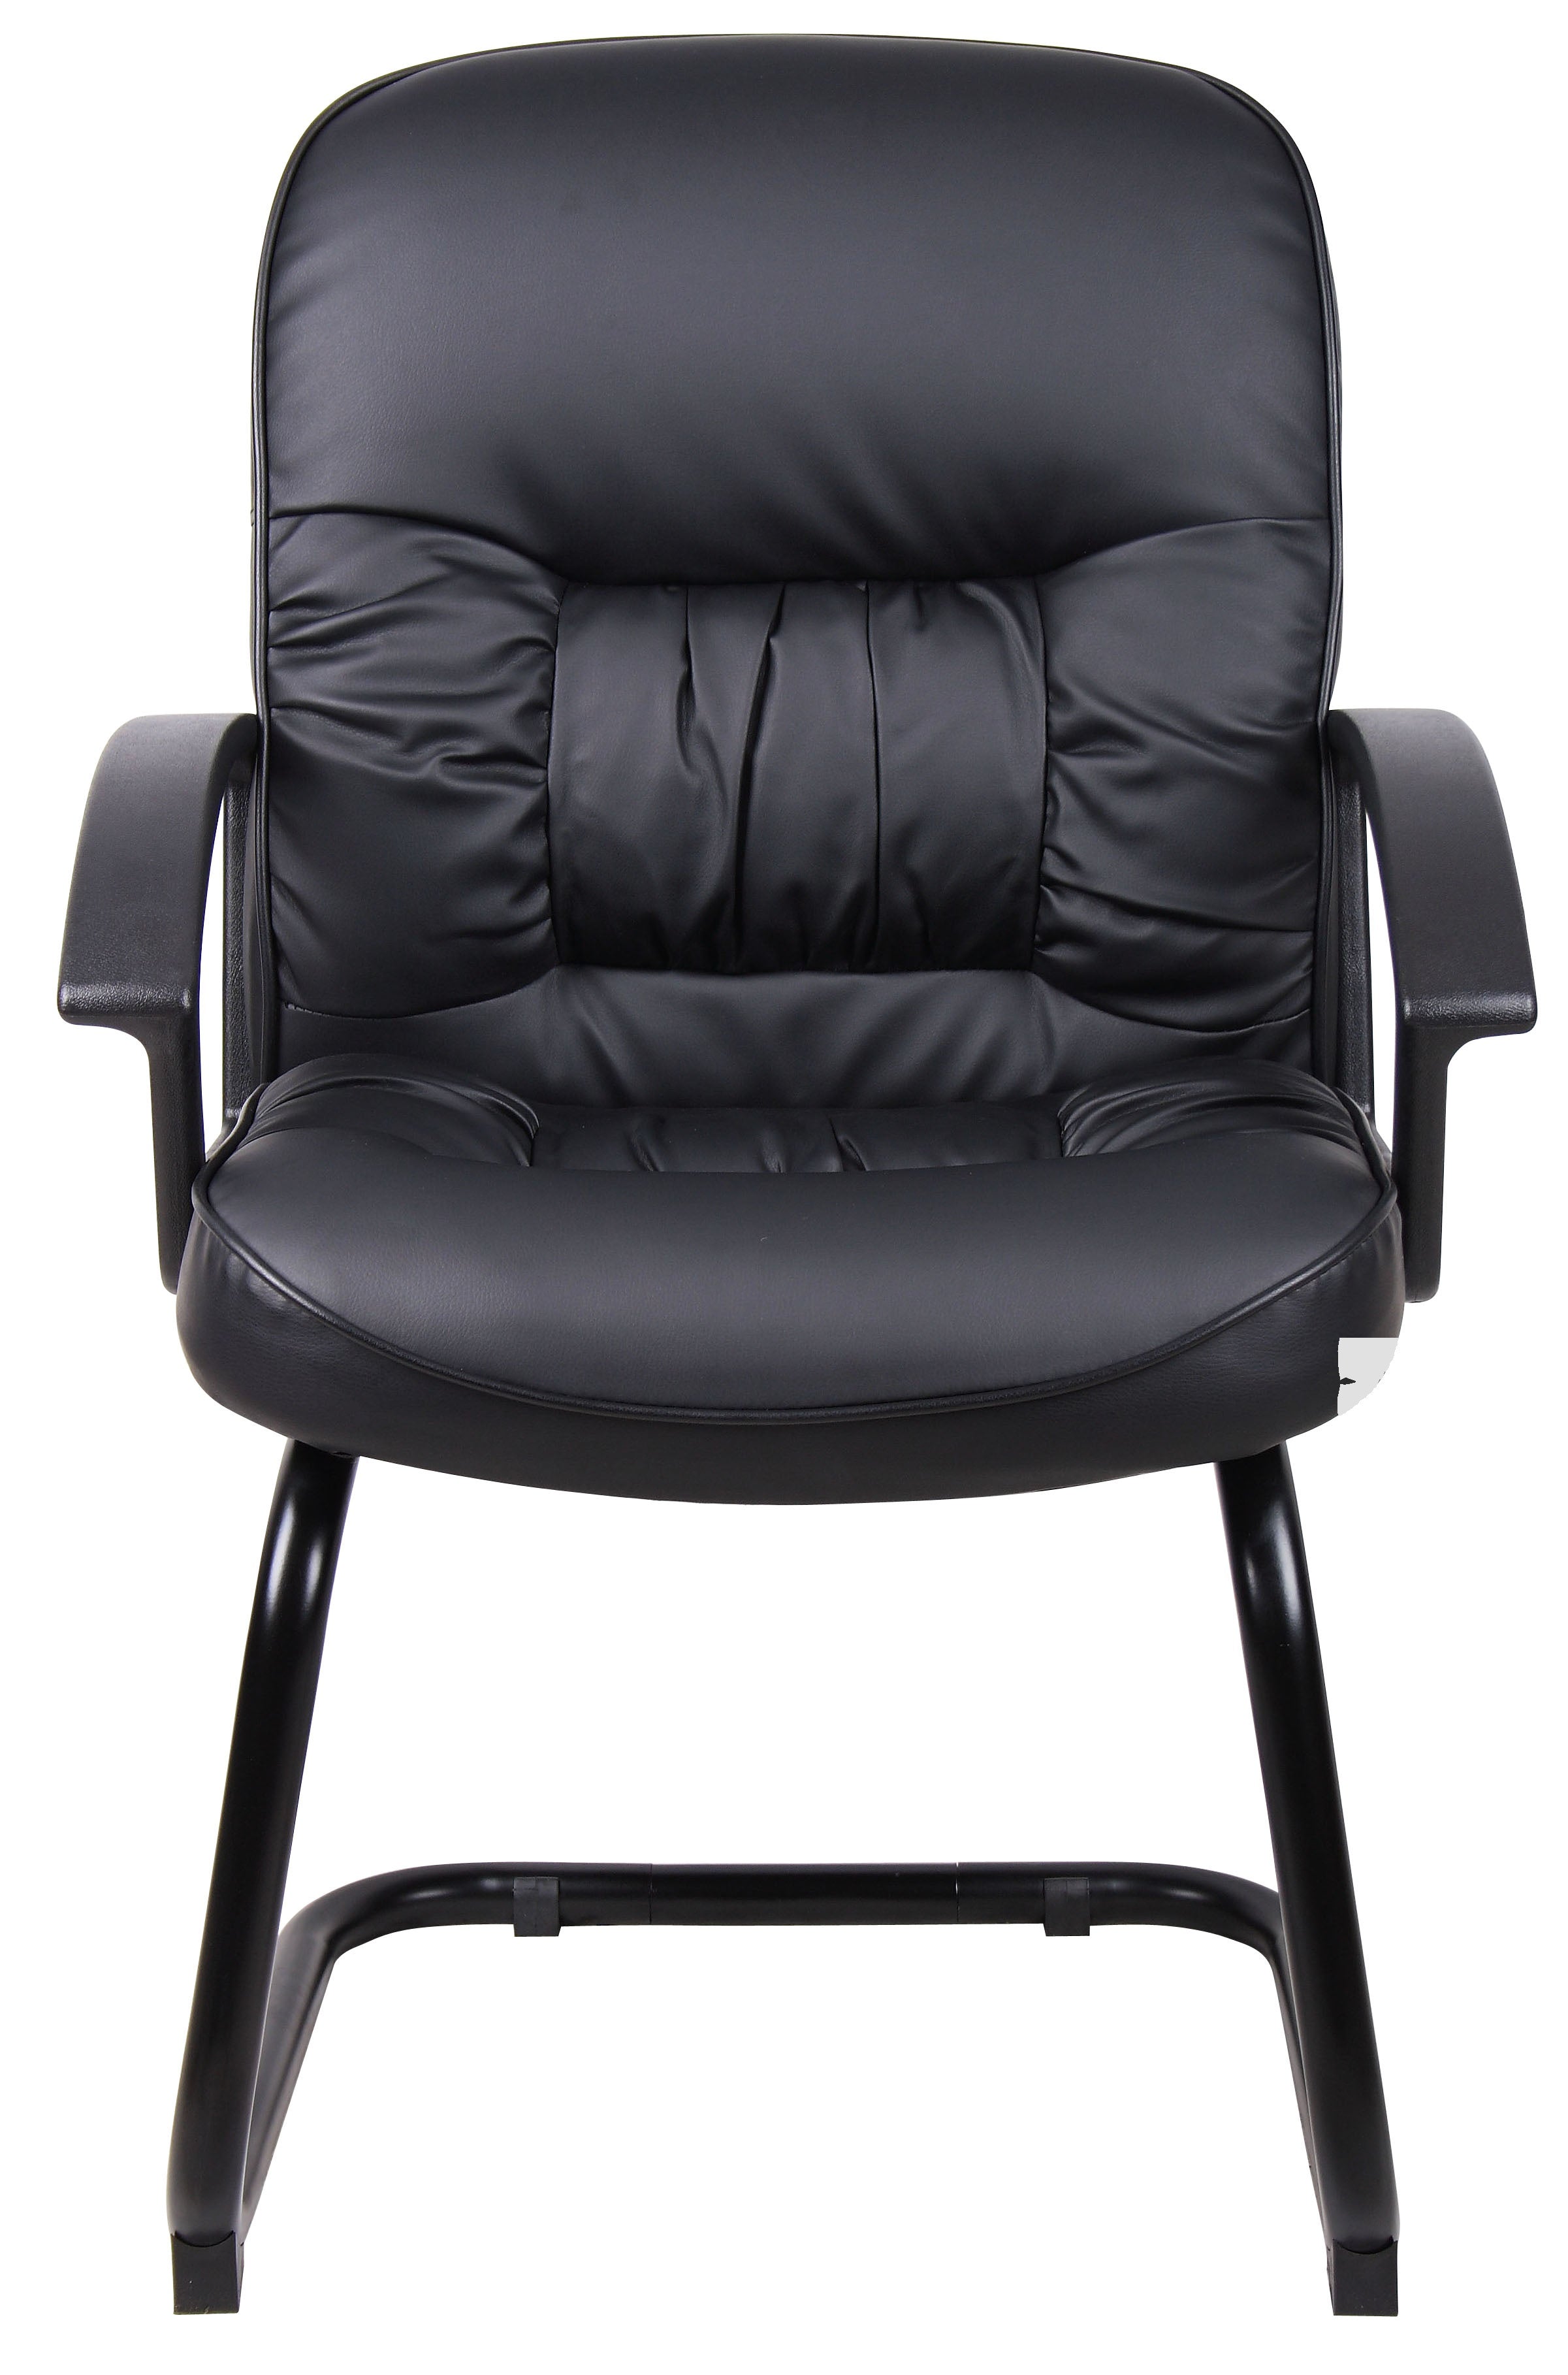 B7309 - Executive LeatherPlus Guest Chair